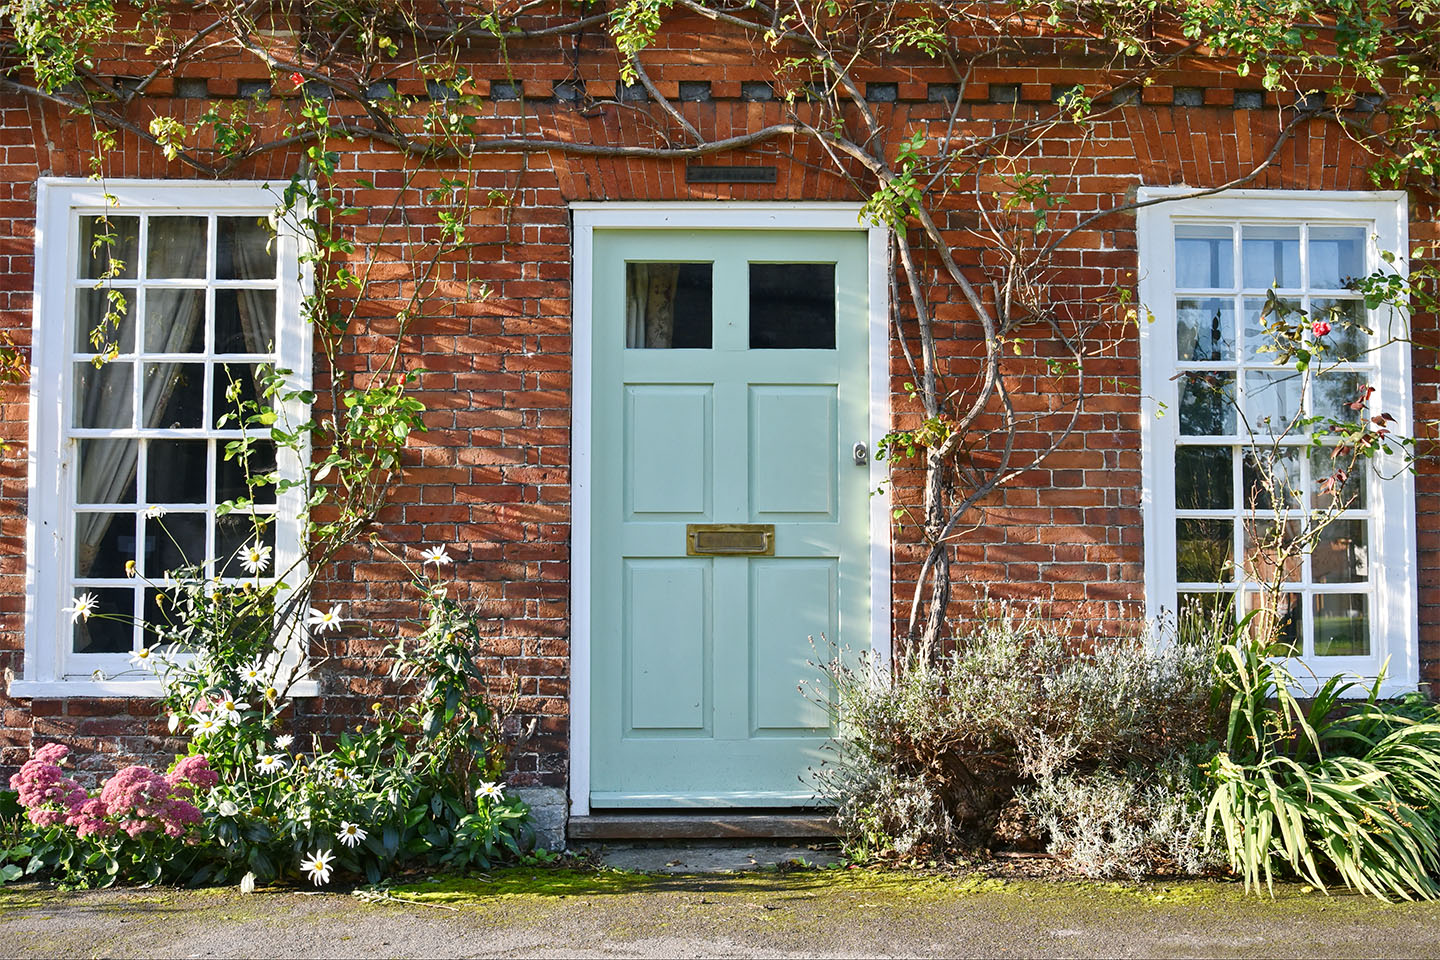 uk holiday cottage with door and windows